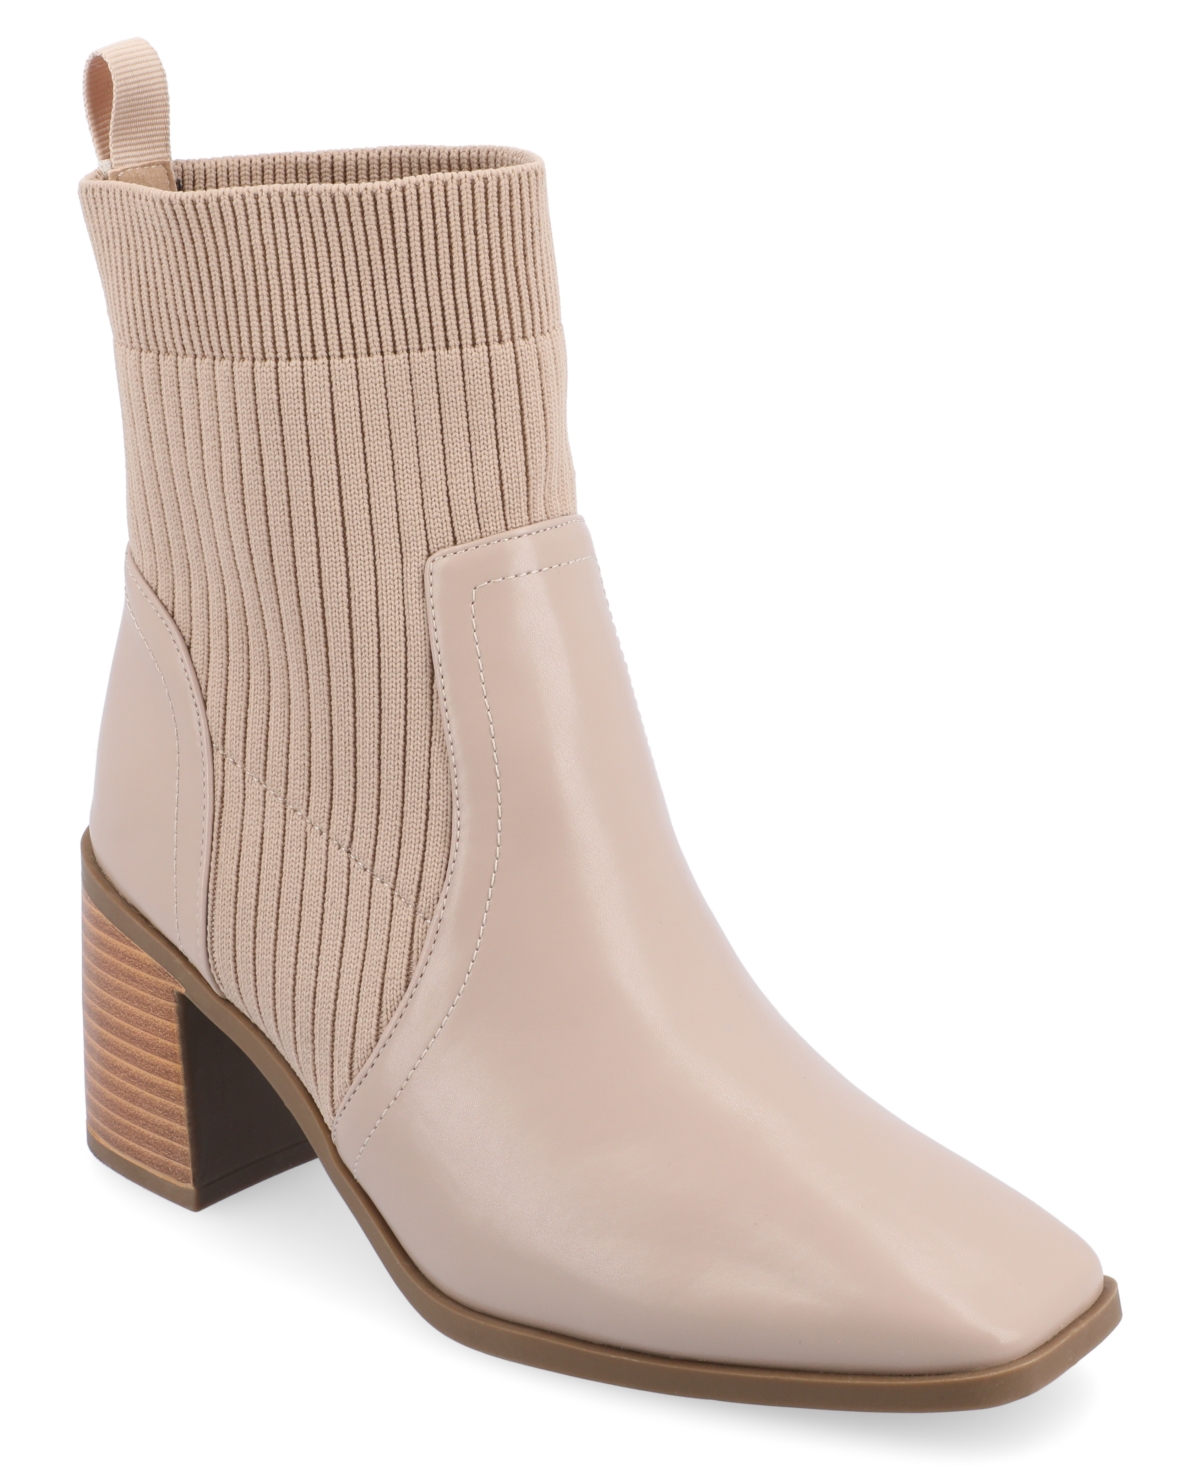 Shop Journee Collection Women's Harlowe Tru Comfort Foam Chelsea Knit And Faux Leather Boots In Taupe